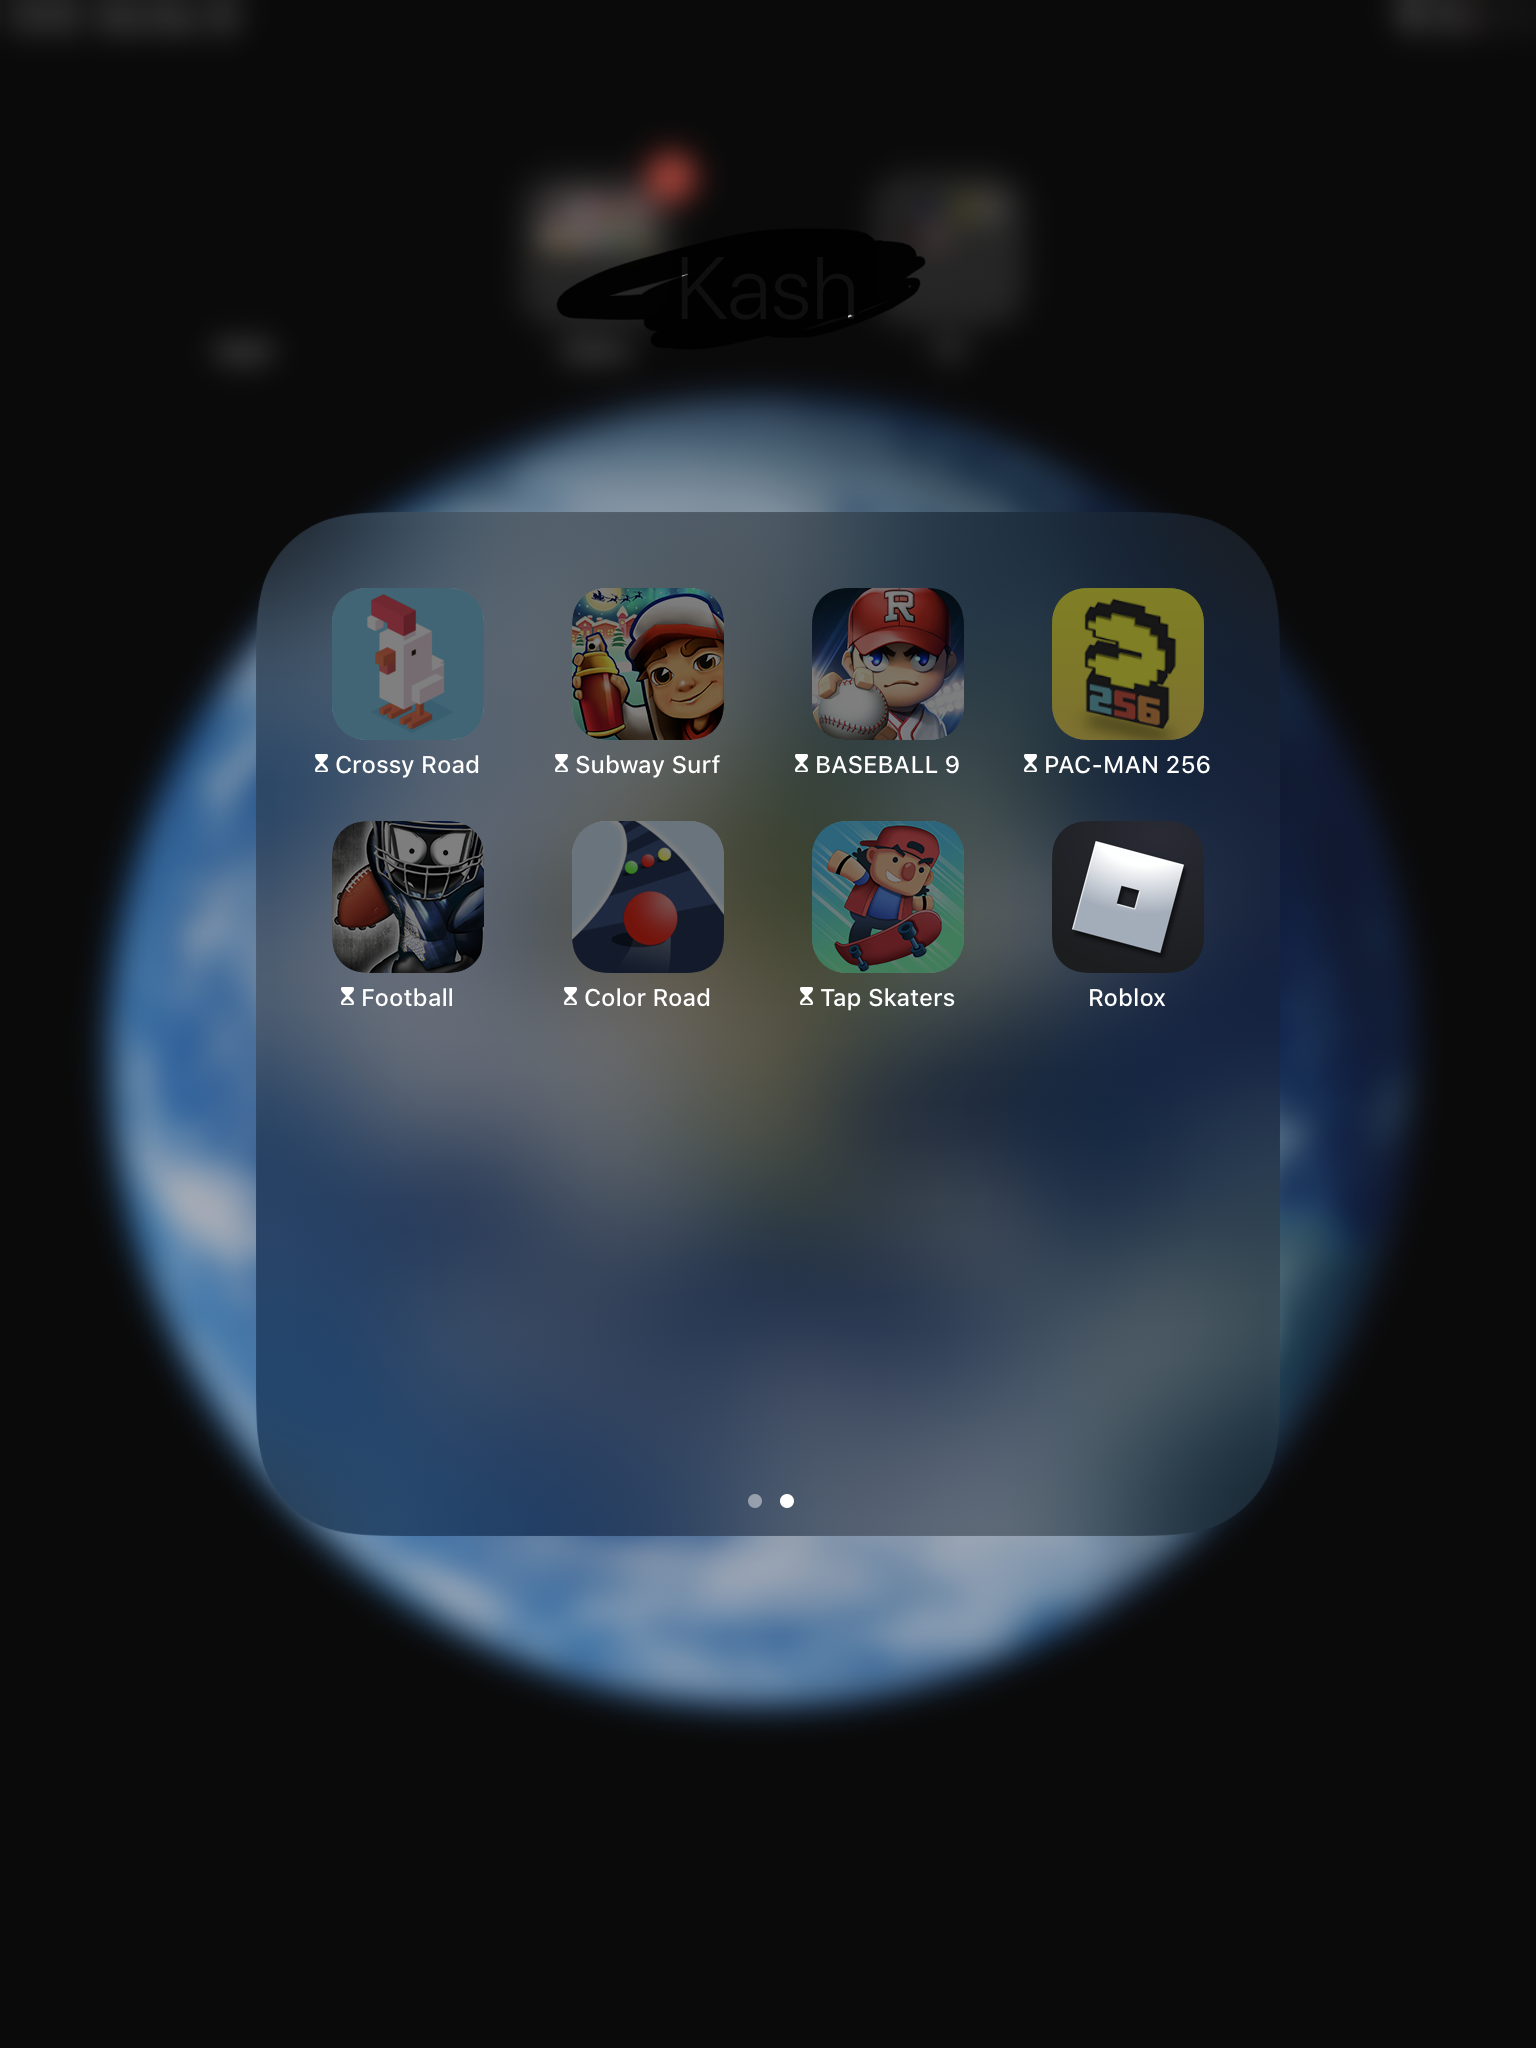 Screen Time Not Working With Roblox Apple Community - how to fix roblox not loading games on ipad